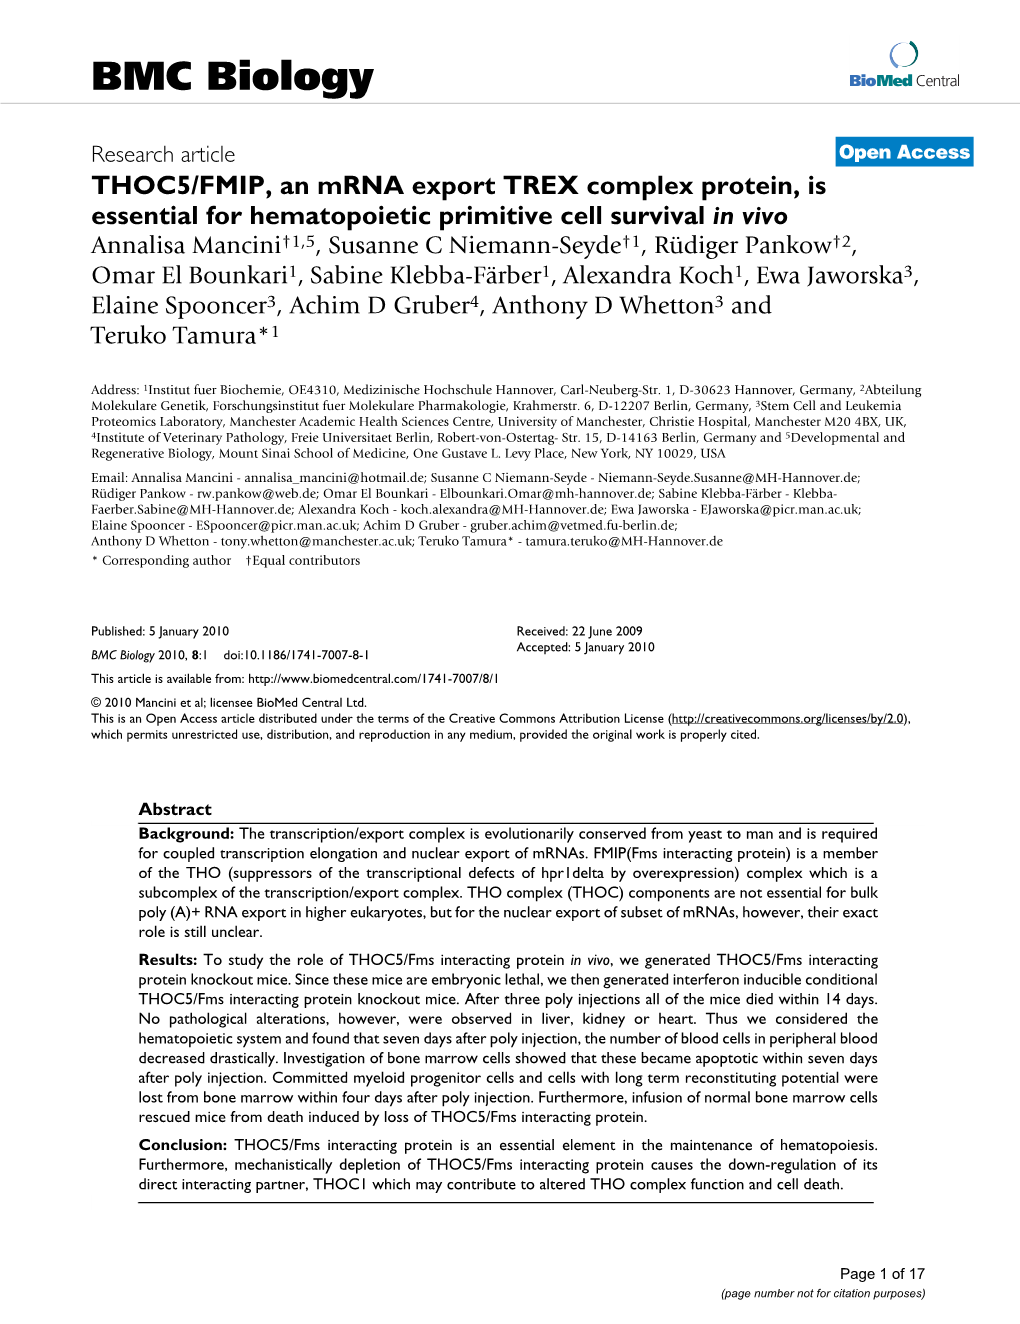 THOC5/FMIP, an Mrna Export TREX Complex Protein, Is Essential For